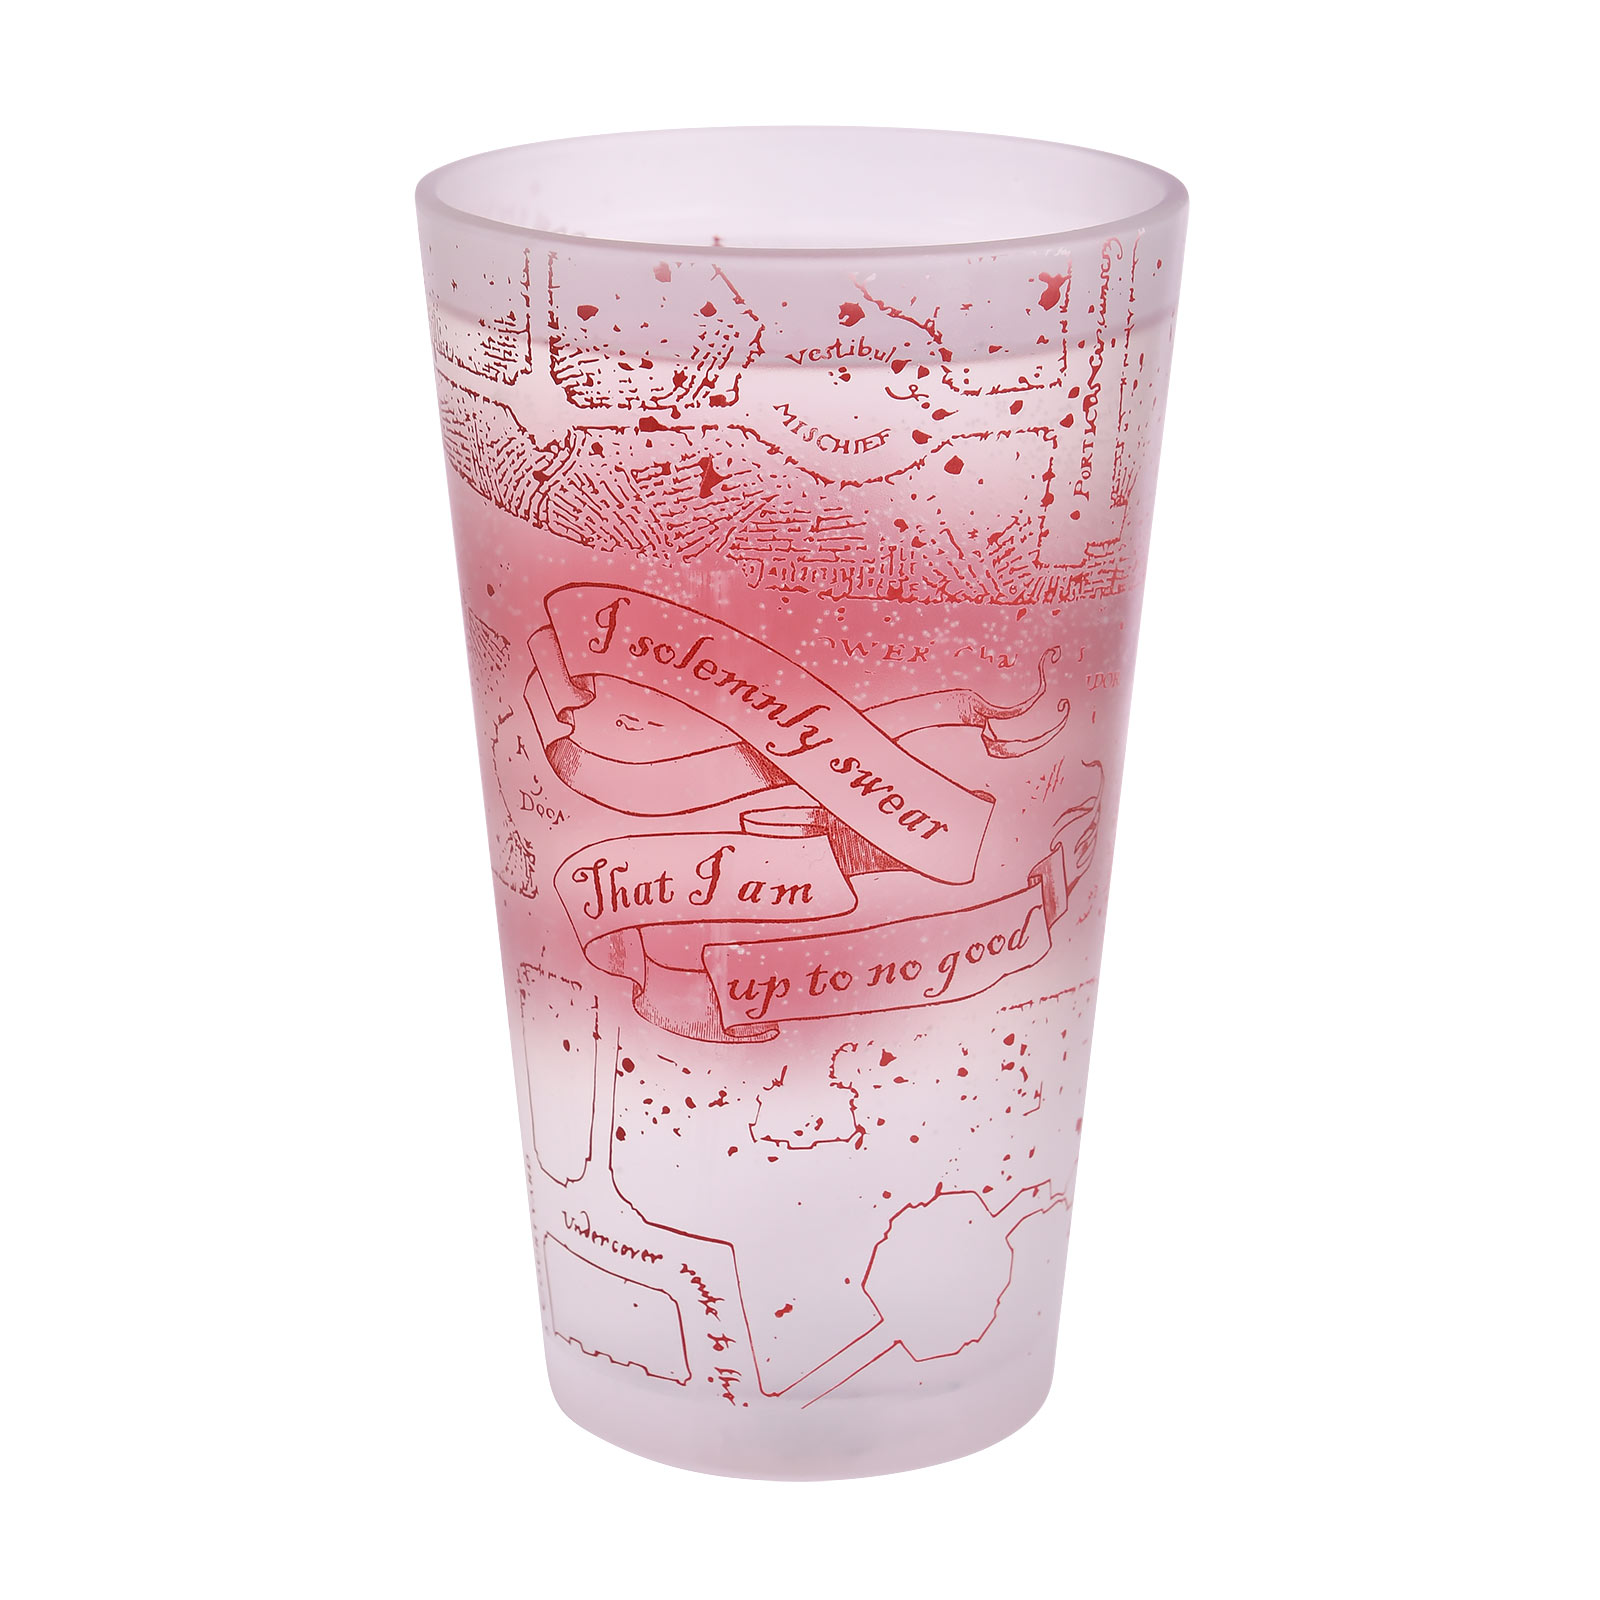 Harry Potter - Marauders Map Cold Effect Glass